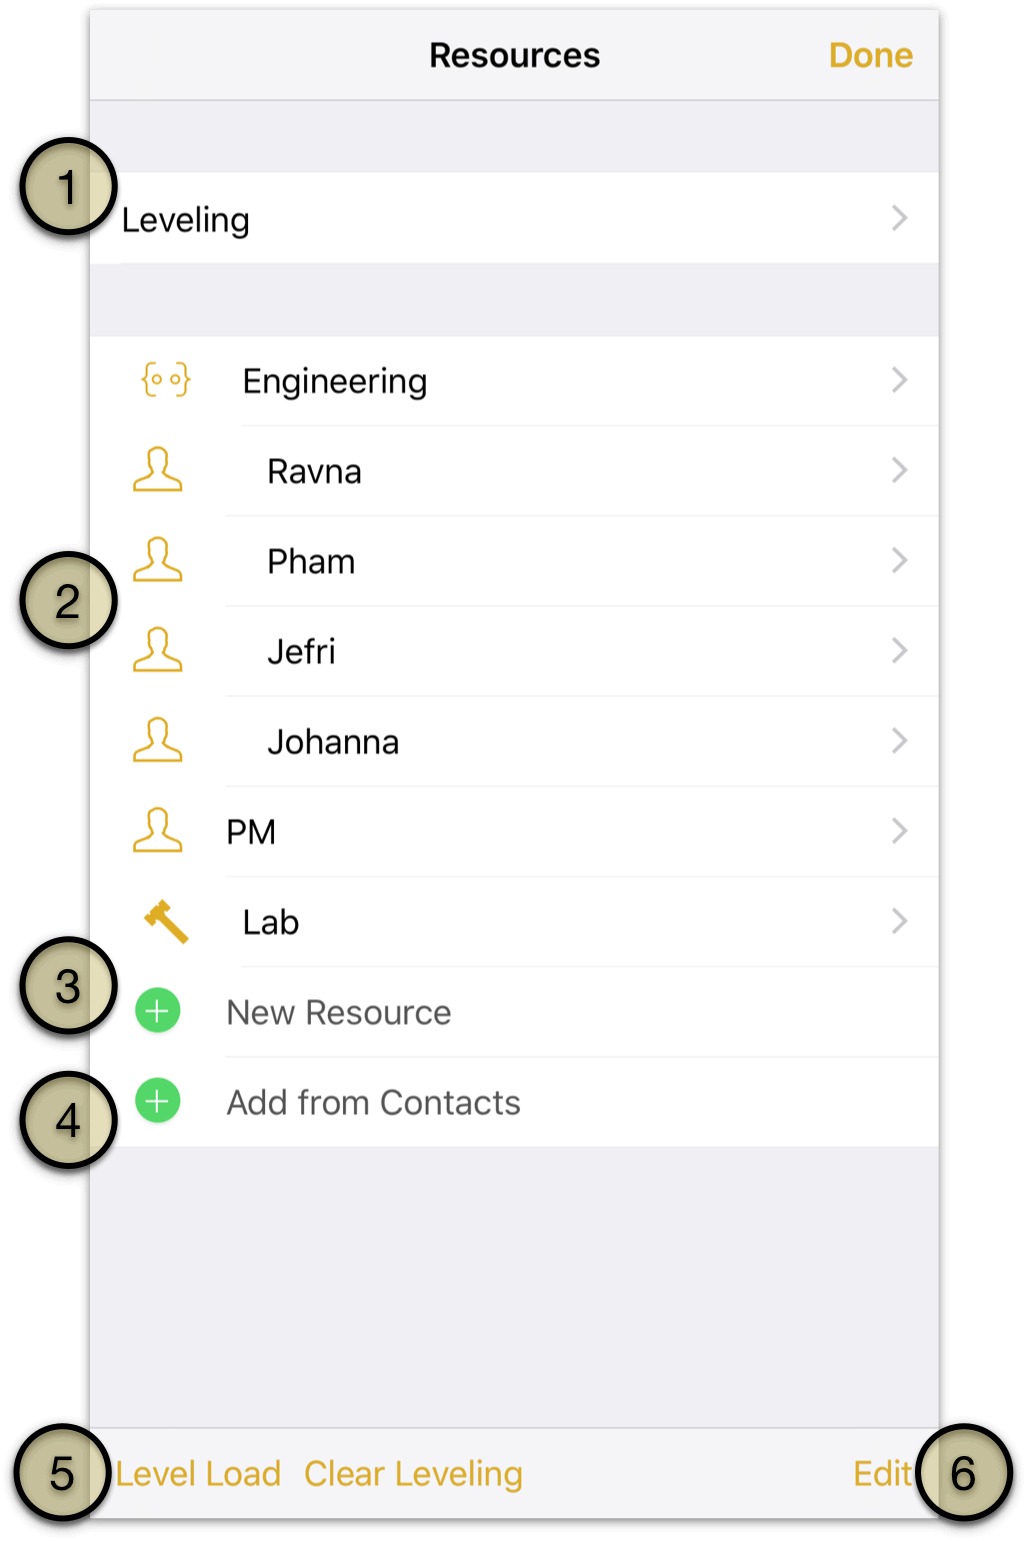 The resources inspector in OmniPlan 2 for iOS